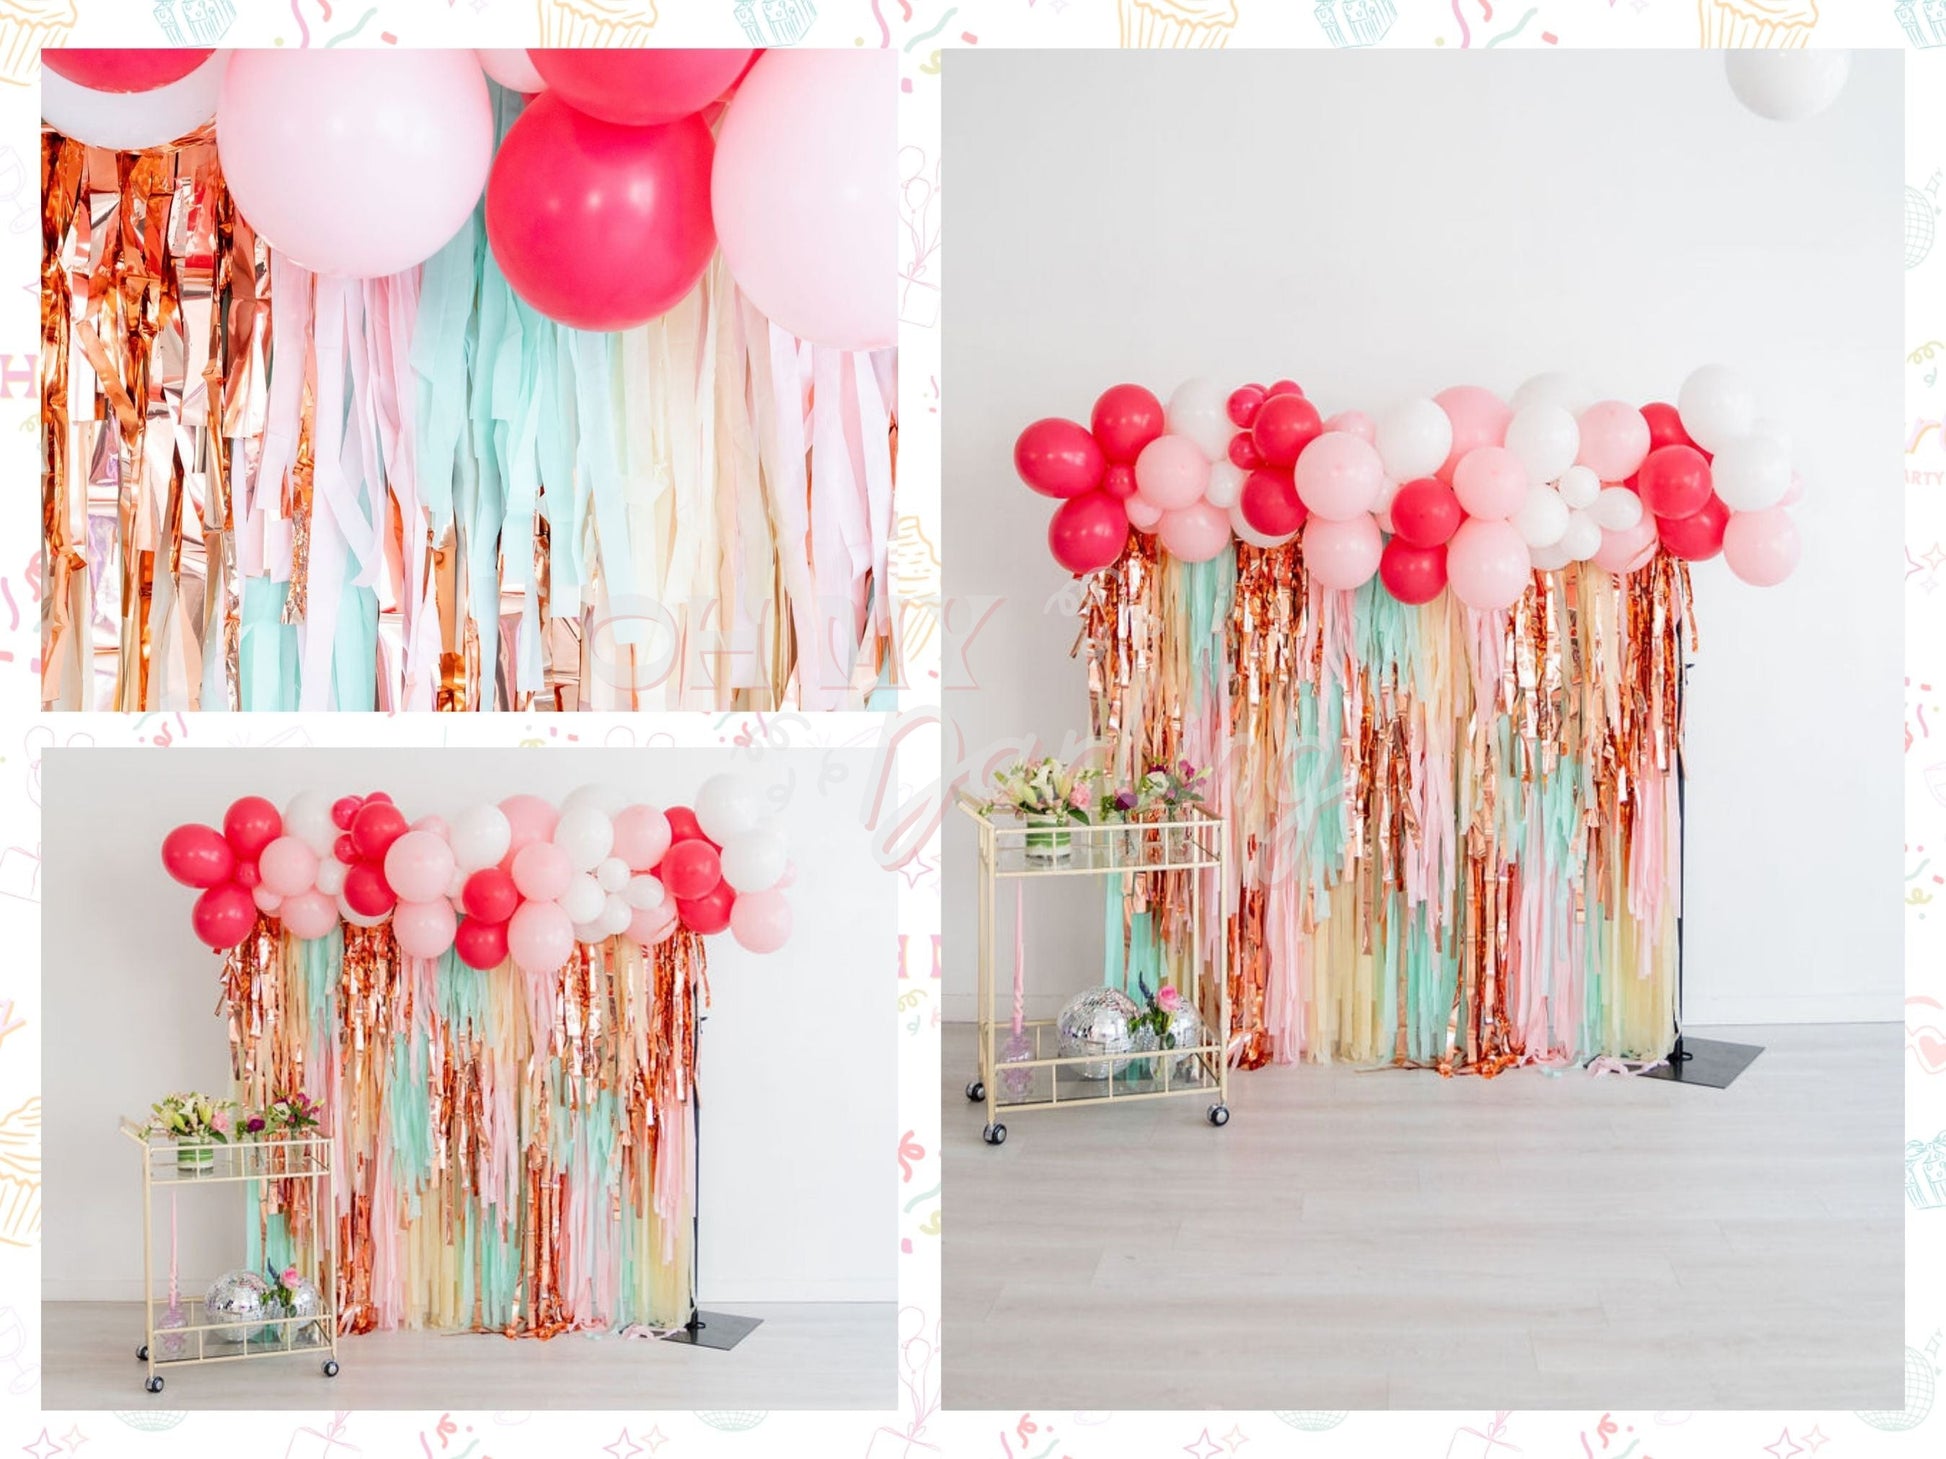 Tea for Two Backdrop-Fringe Backdrop-Party Decor-Oh My Darling Party Co-Oh My Darling Party Co-baby, baby pink, baby shower, backdrops for party, balloon garlands, be my valentine, birthday decorations, birthday girl, blush, bridal shower, butterfly, cream, florals, fringe garland, Fringe Streamers, girl baby shower, girl birthday, girl party, GOLD BACKDROP, GREEN BACKDROP, GREEN BACKDROPS, happy birthday, metallic backdrop, mint, oh baby, OMDPC, party backdrops, pastel, pastel birthday, pastel party, paste